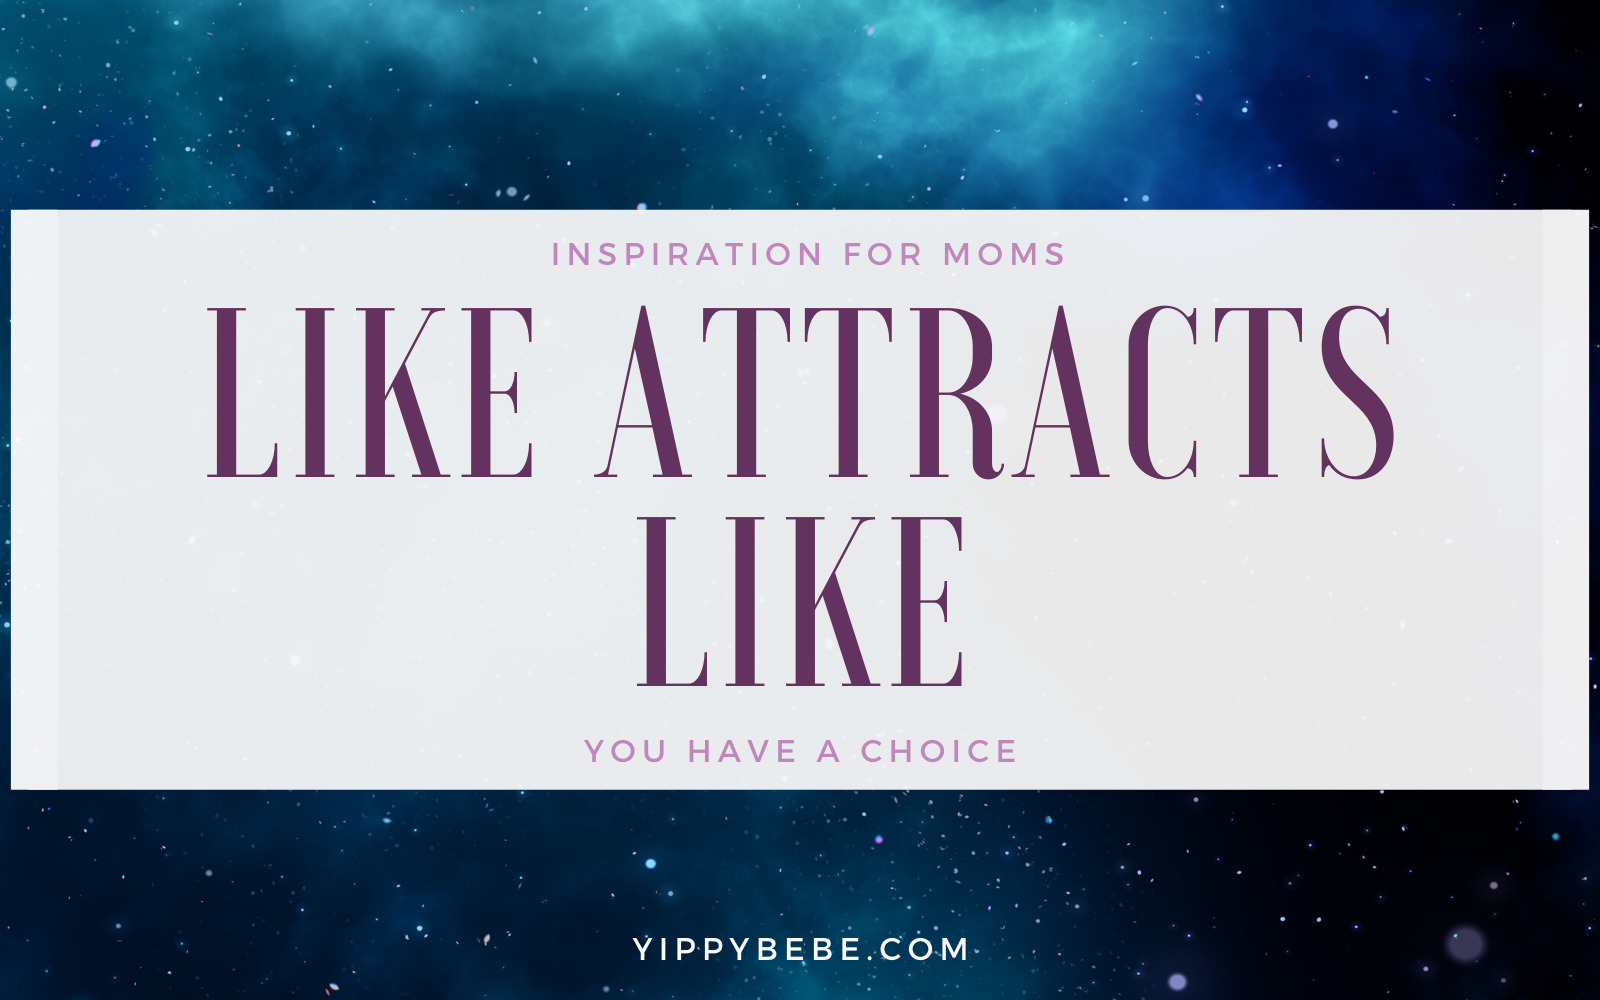 Inspiration for Moms - Like Attracts Like